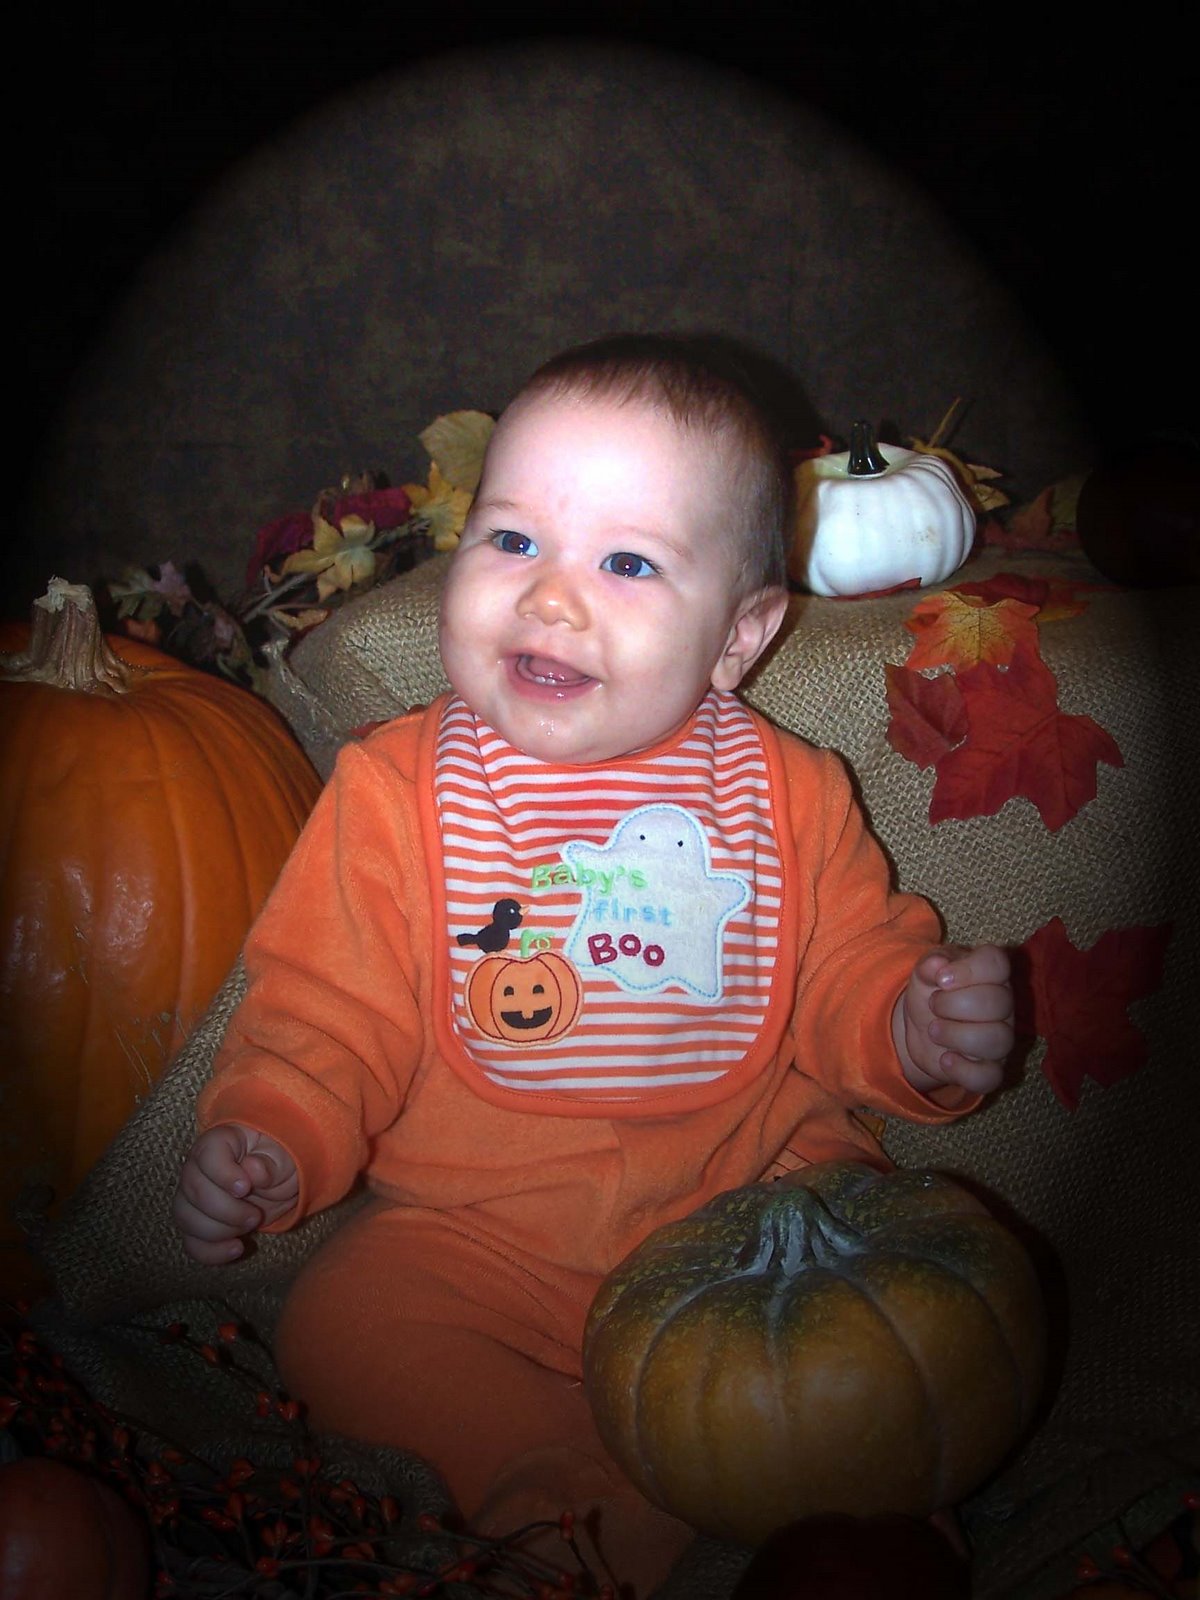 Our lil Punkin